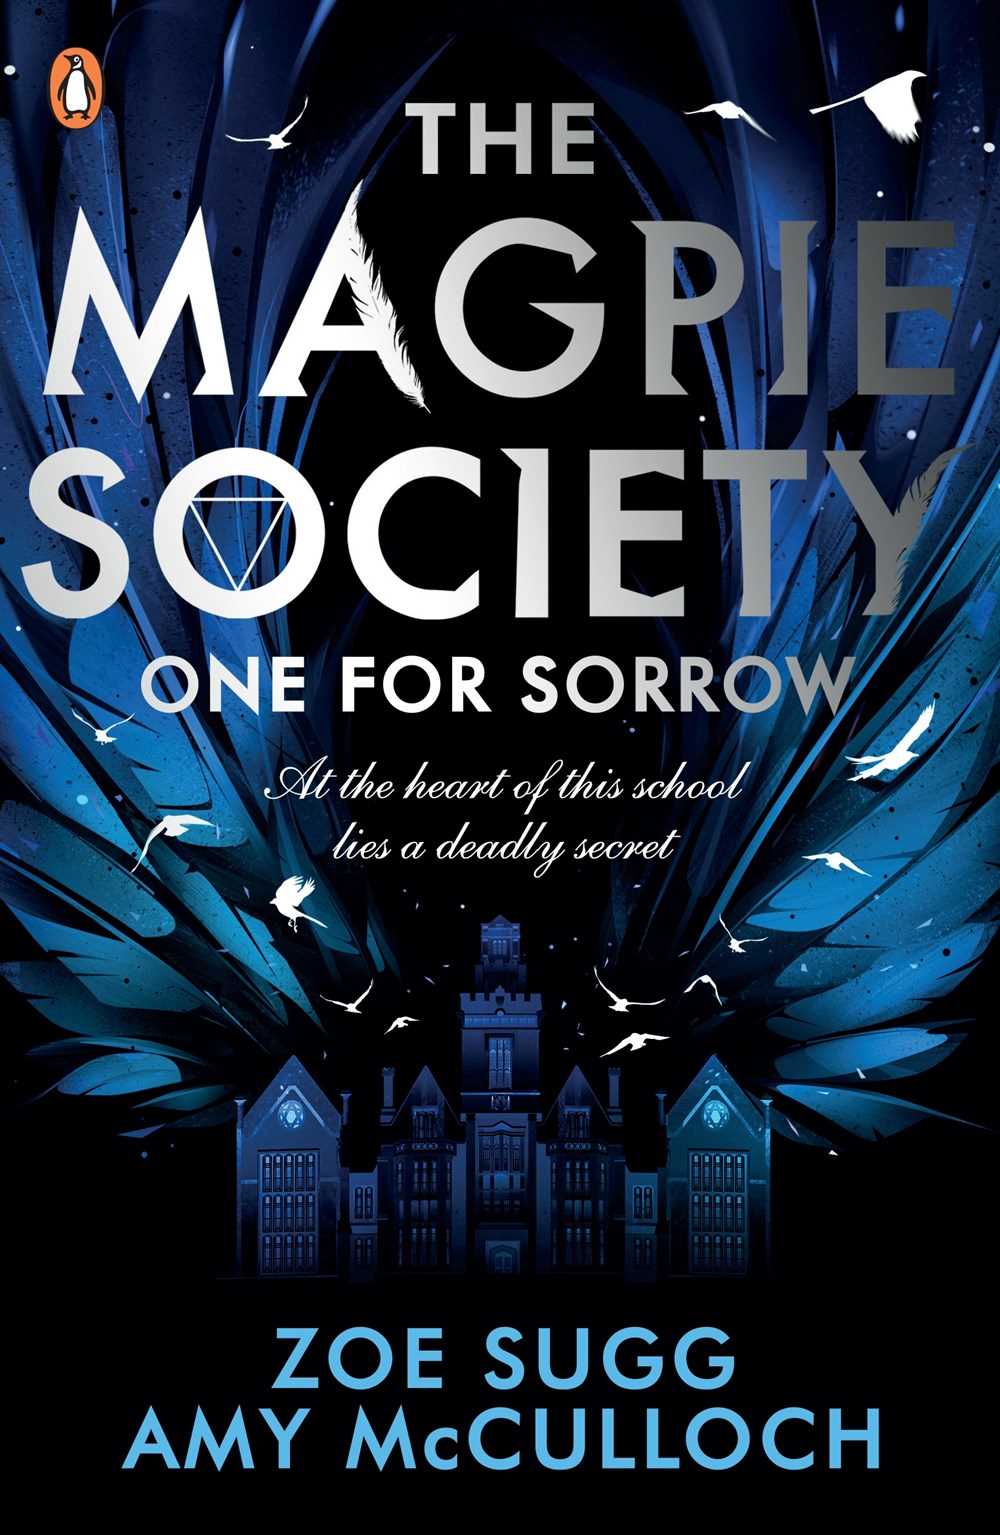 One for Sorrow (The Magpie Society)